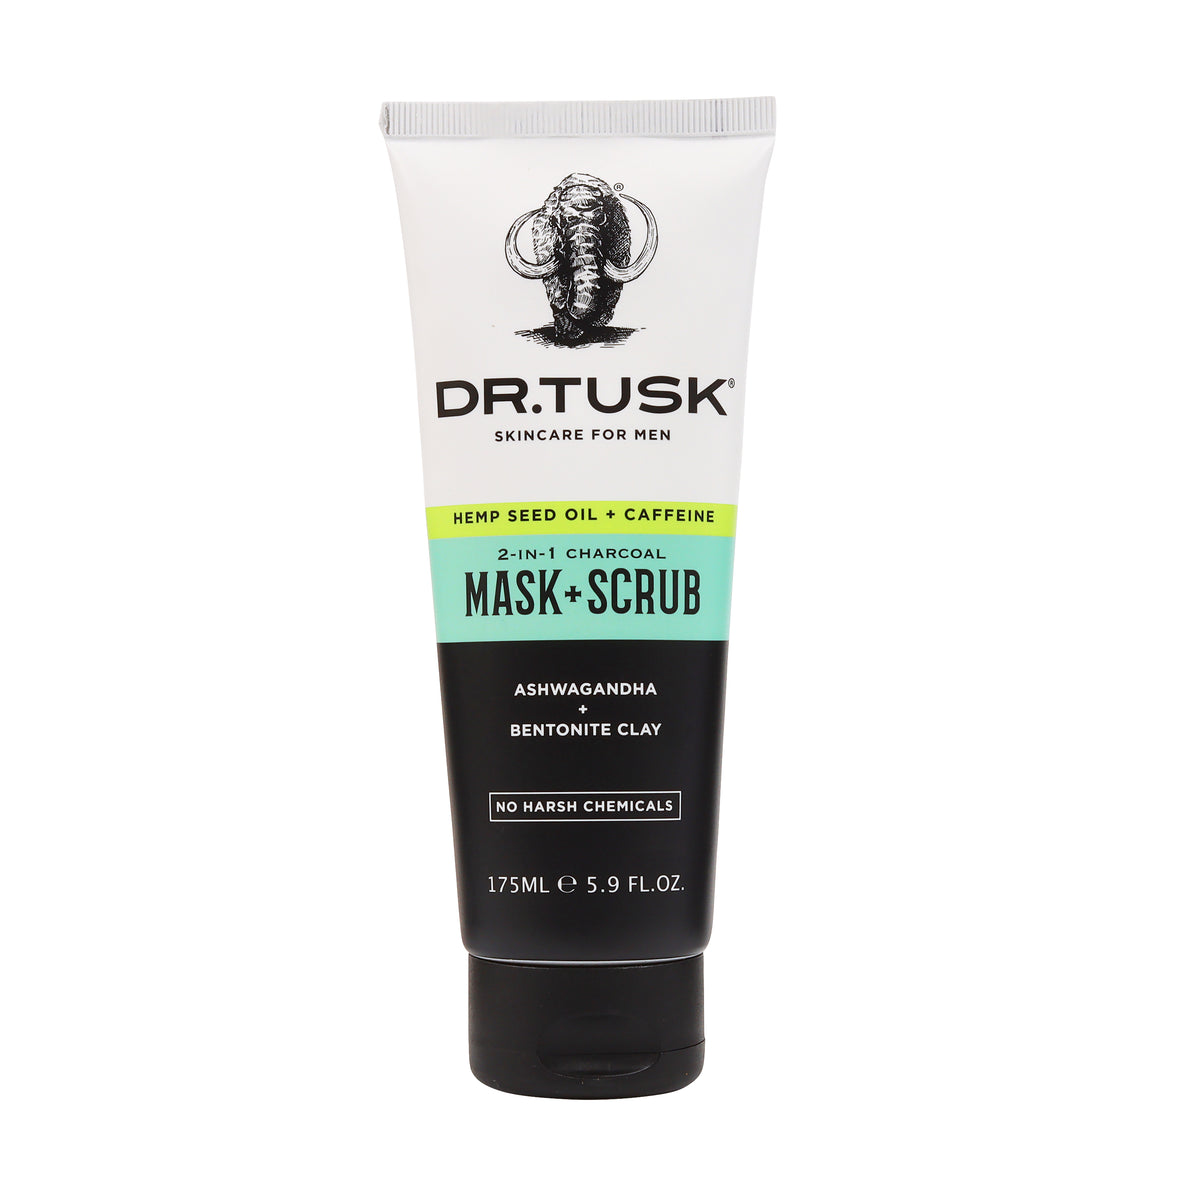 2-IN-1 CHARCOAL FACE MASK + SCRUB